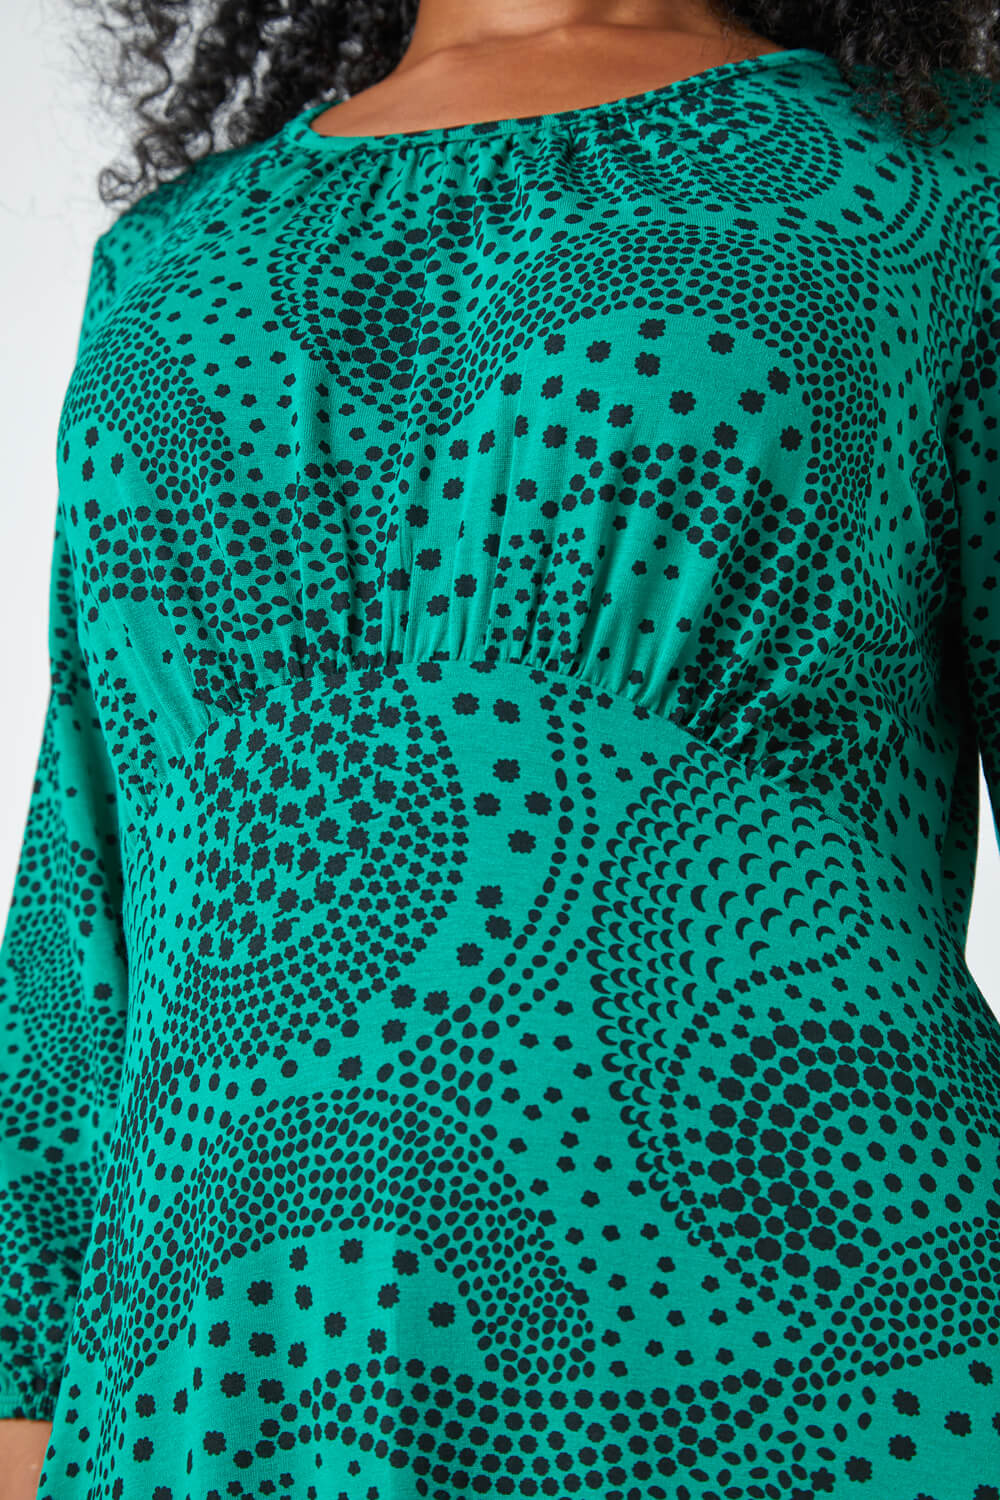 Green Petite Abstract Spot Stretch Midi Dress, Image 5 of 5